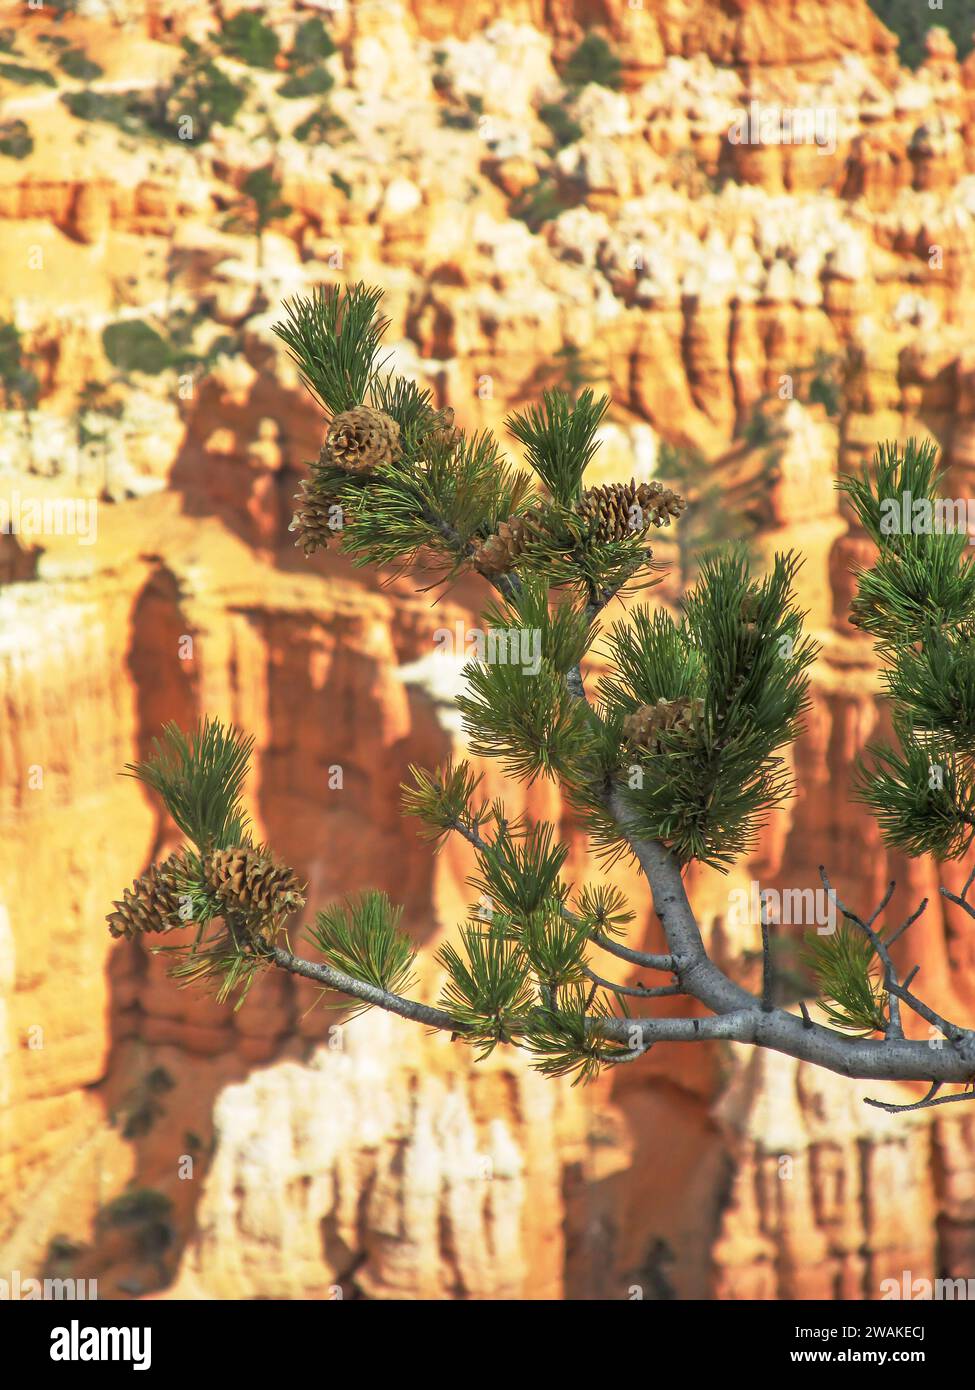 A limber pine tree branch against the vibrant colored limestone hoodoo’s of Bryce Canyon National park in Utah. Stock Photo